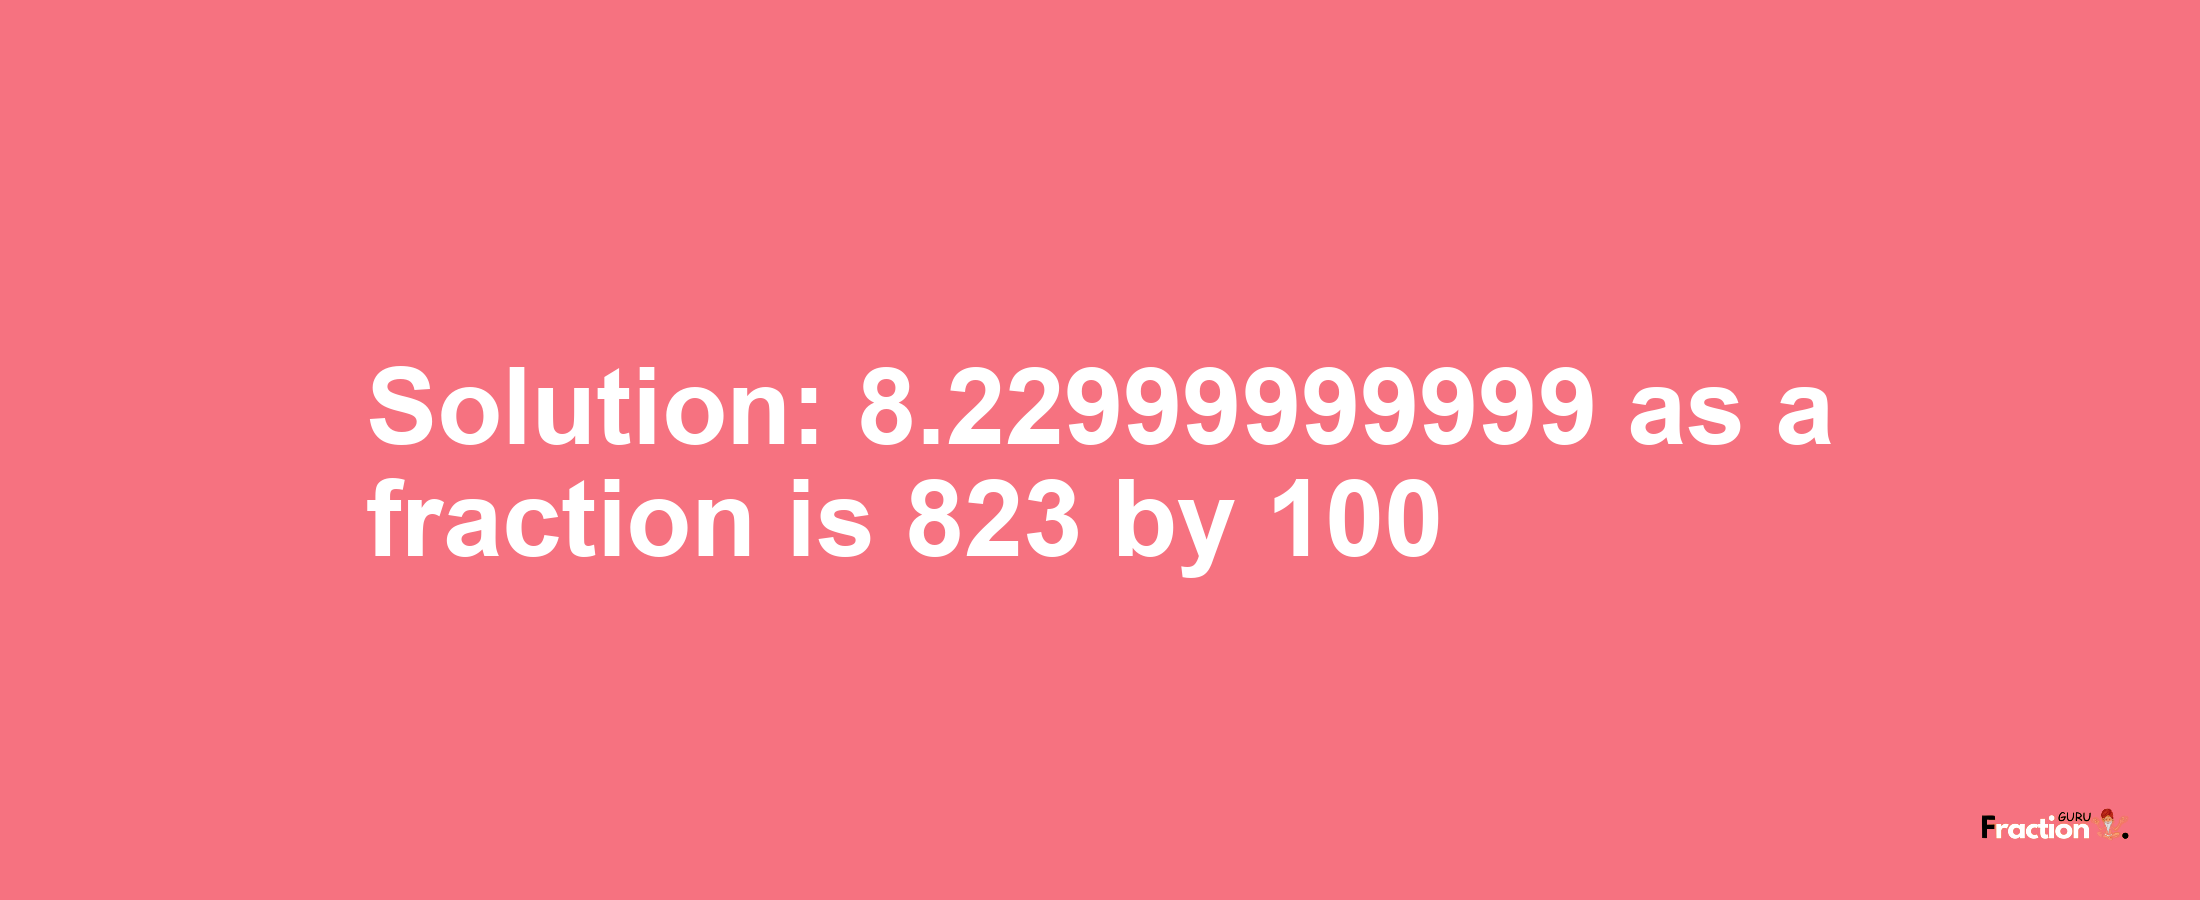 Solution:8.22999999999 as a fraction is 823/100